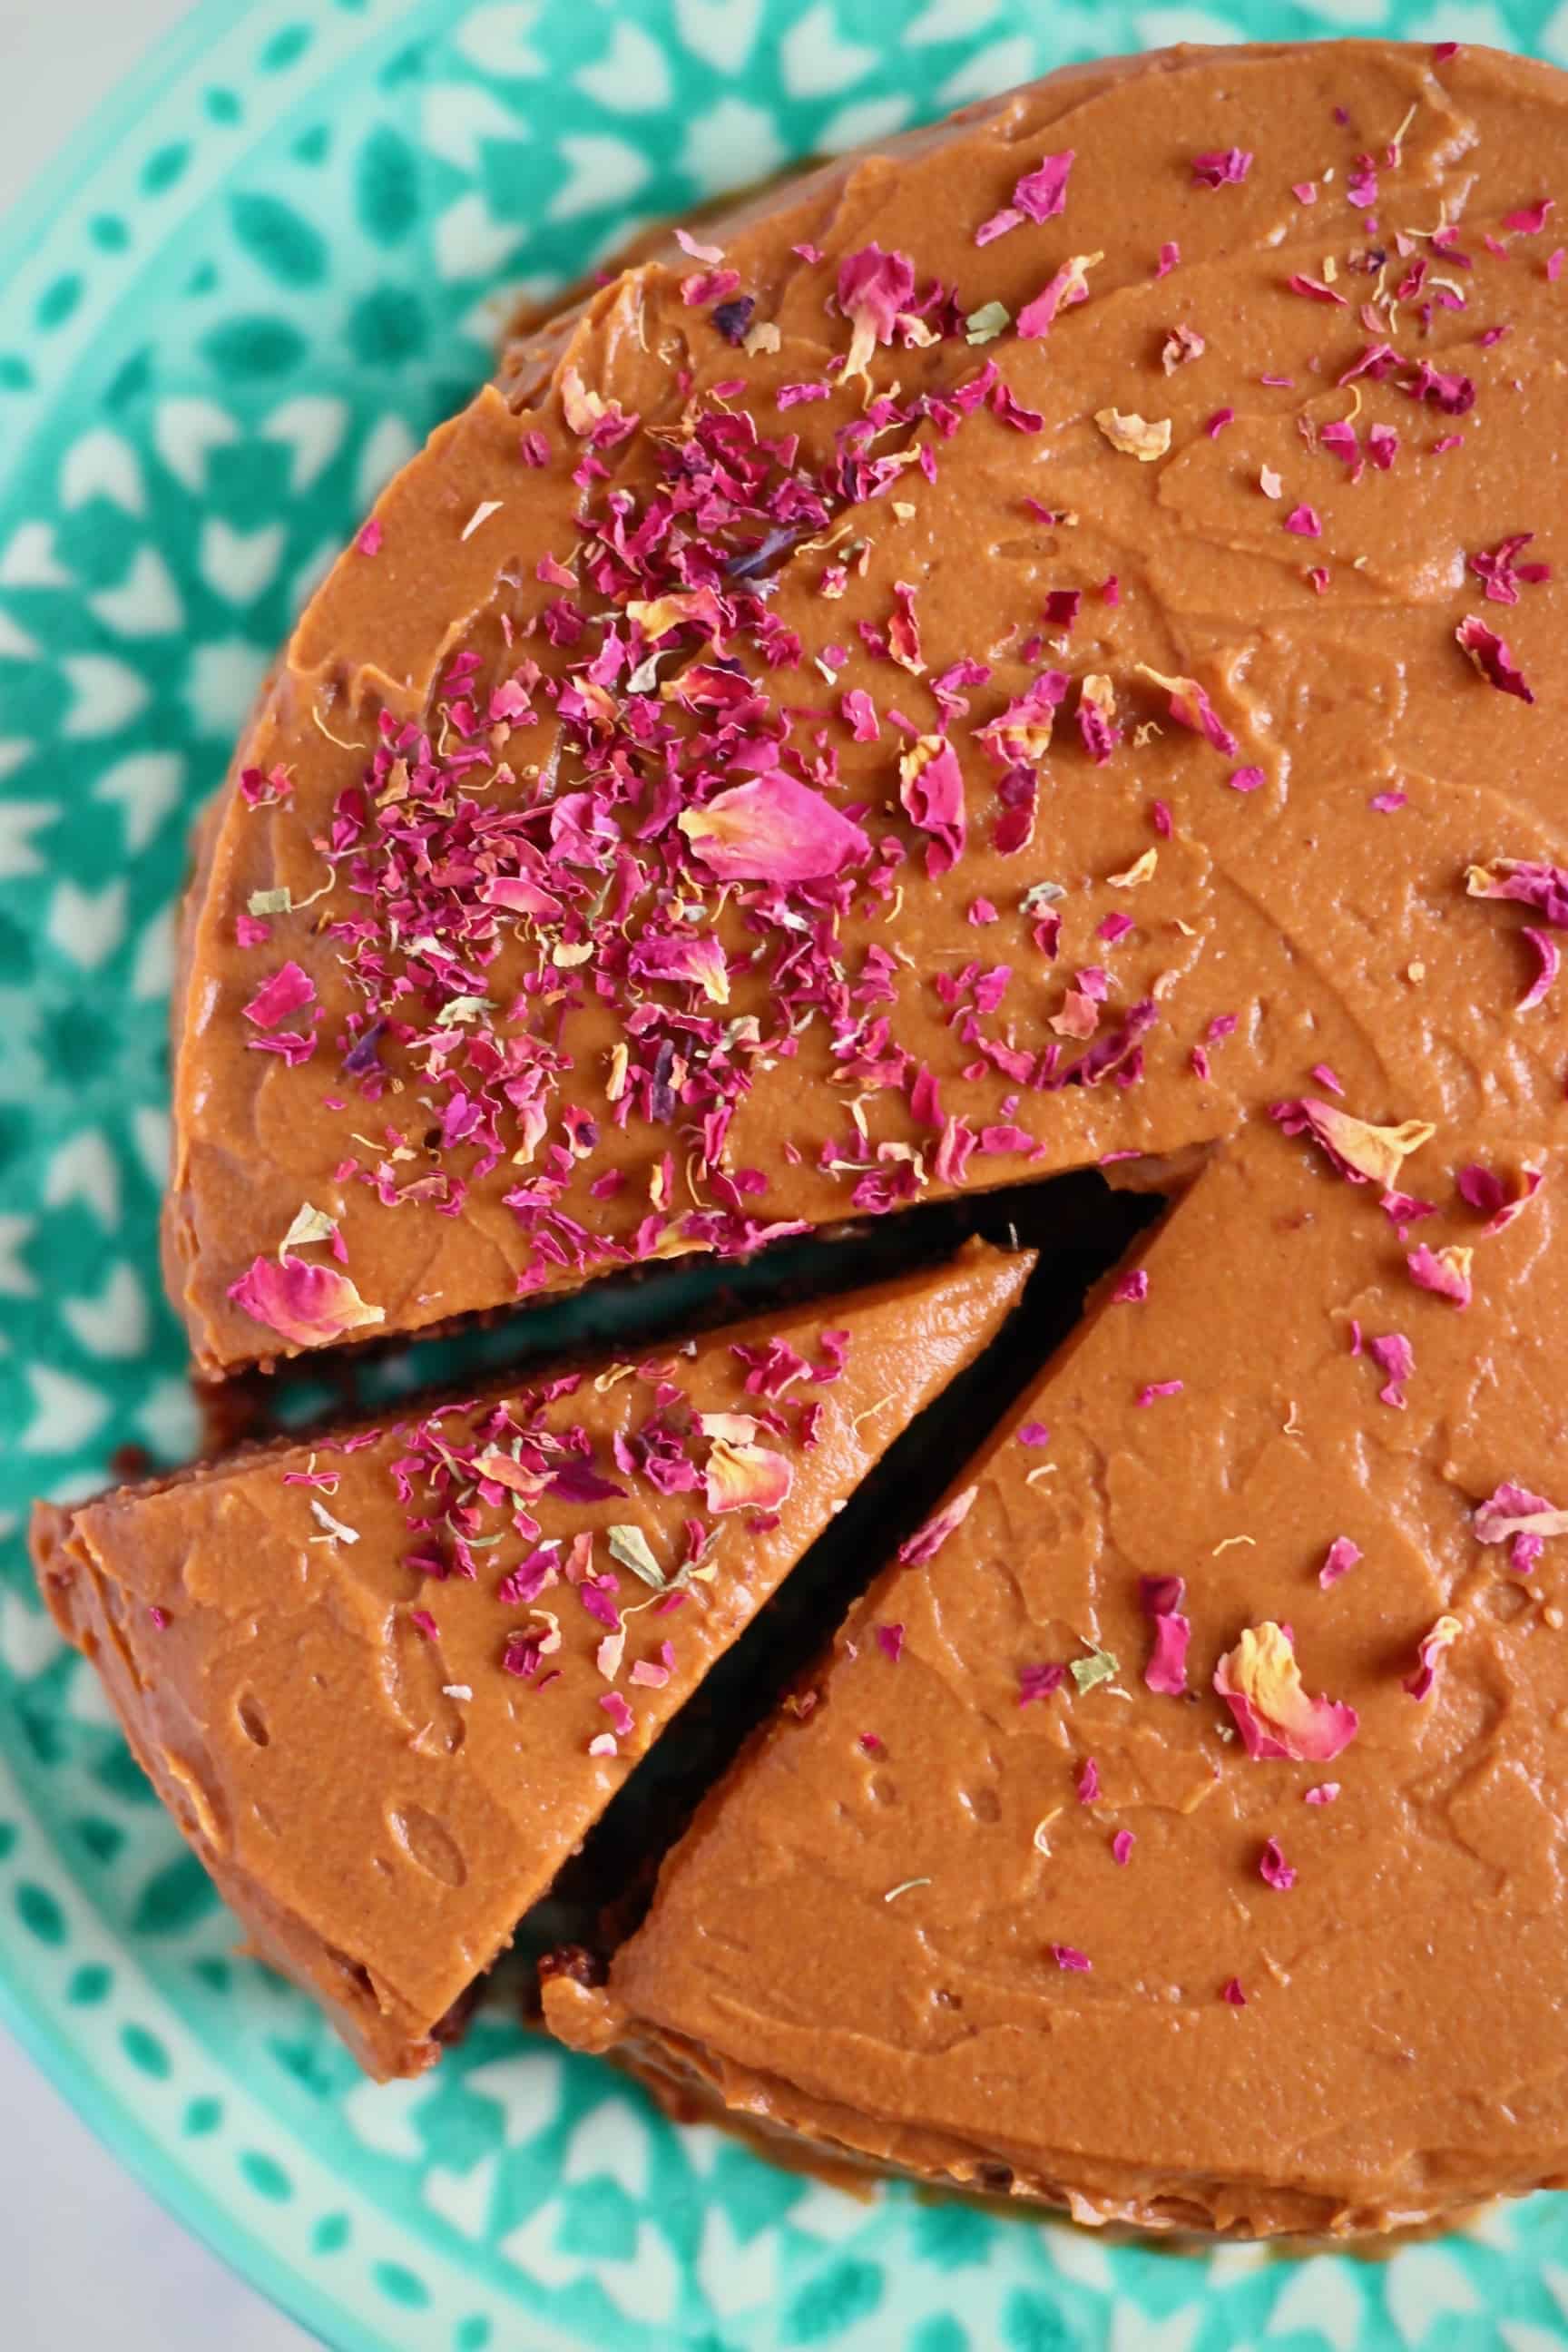 A chocolate cake with a slice taken out of it sprinkled with rose petals on a green cake stand